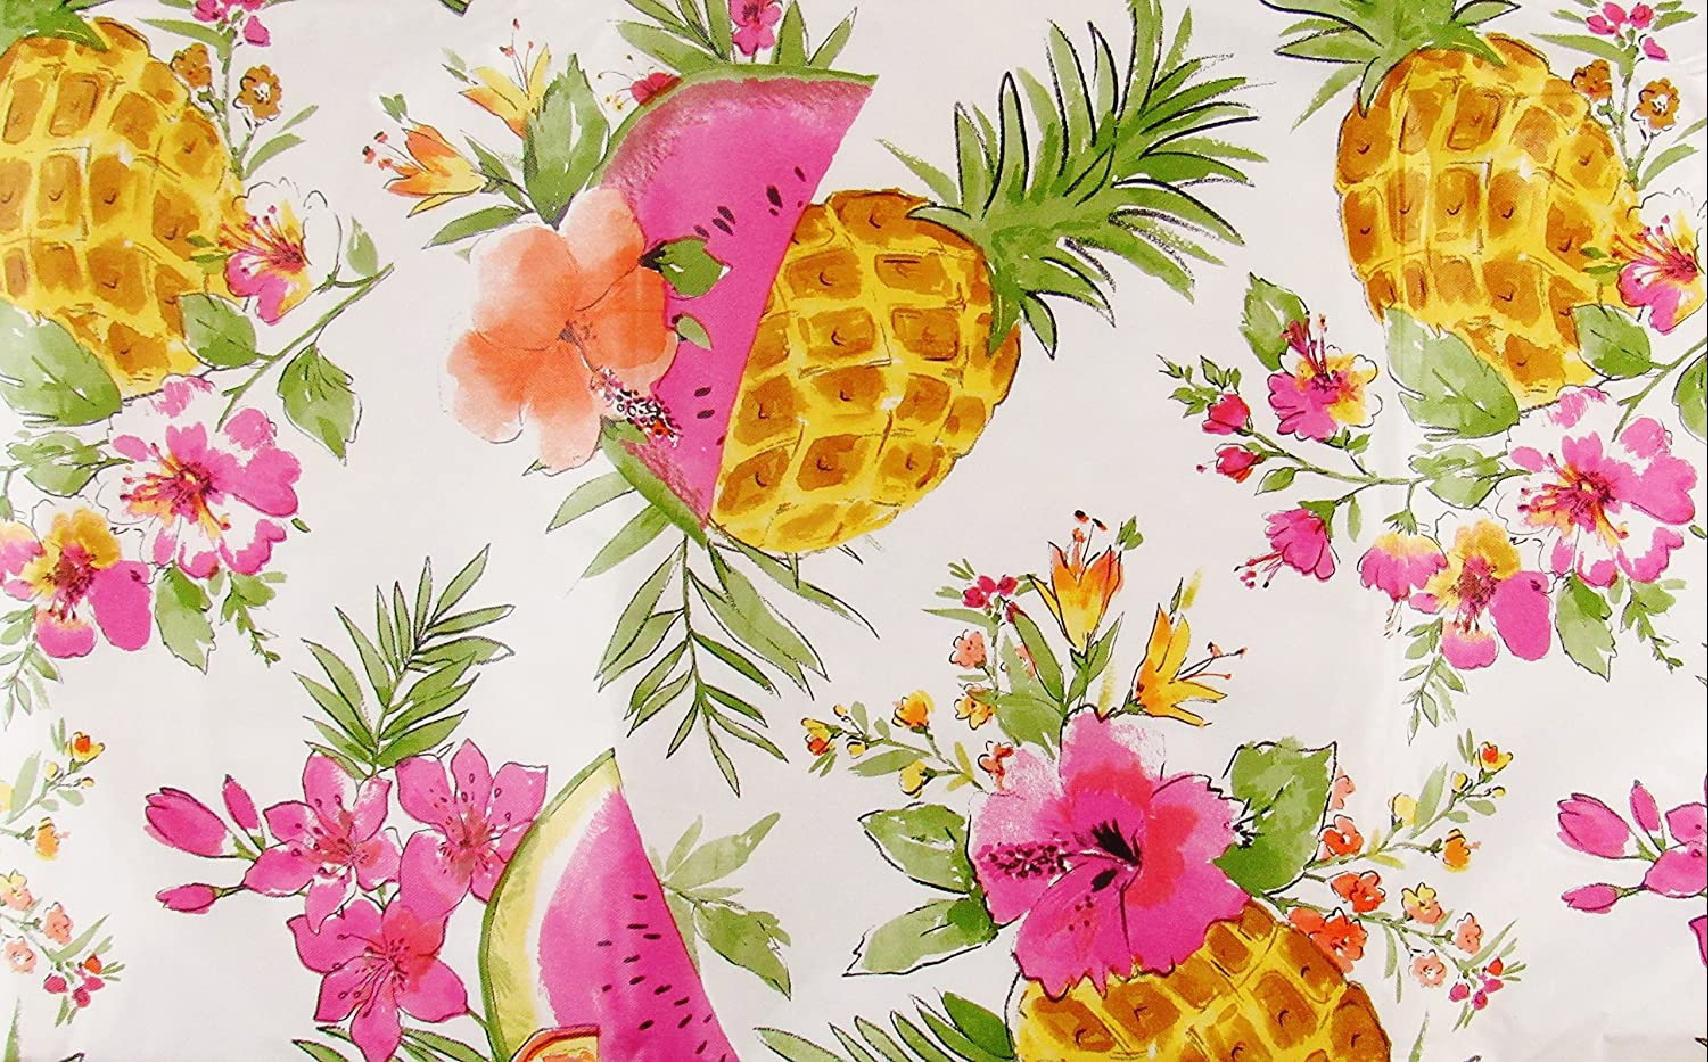 Pineapples,Watermelon & Tropical Flowers  Vinyl Tablecloths Assorted Sizes 